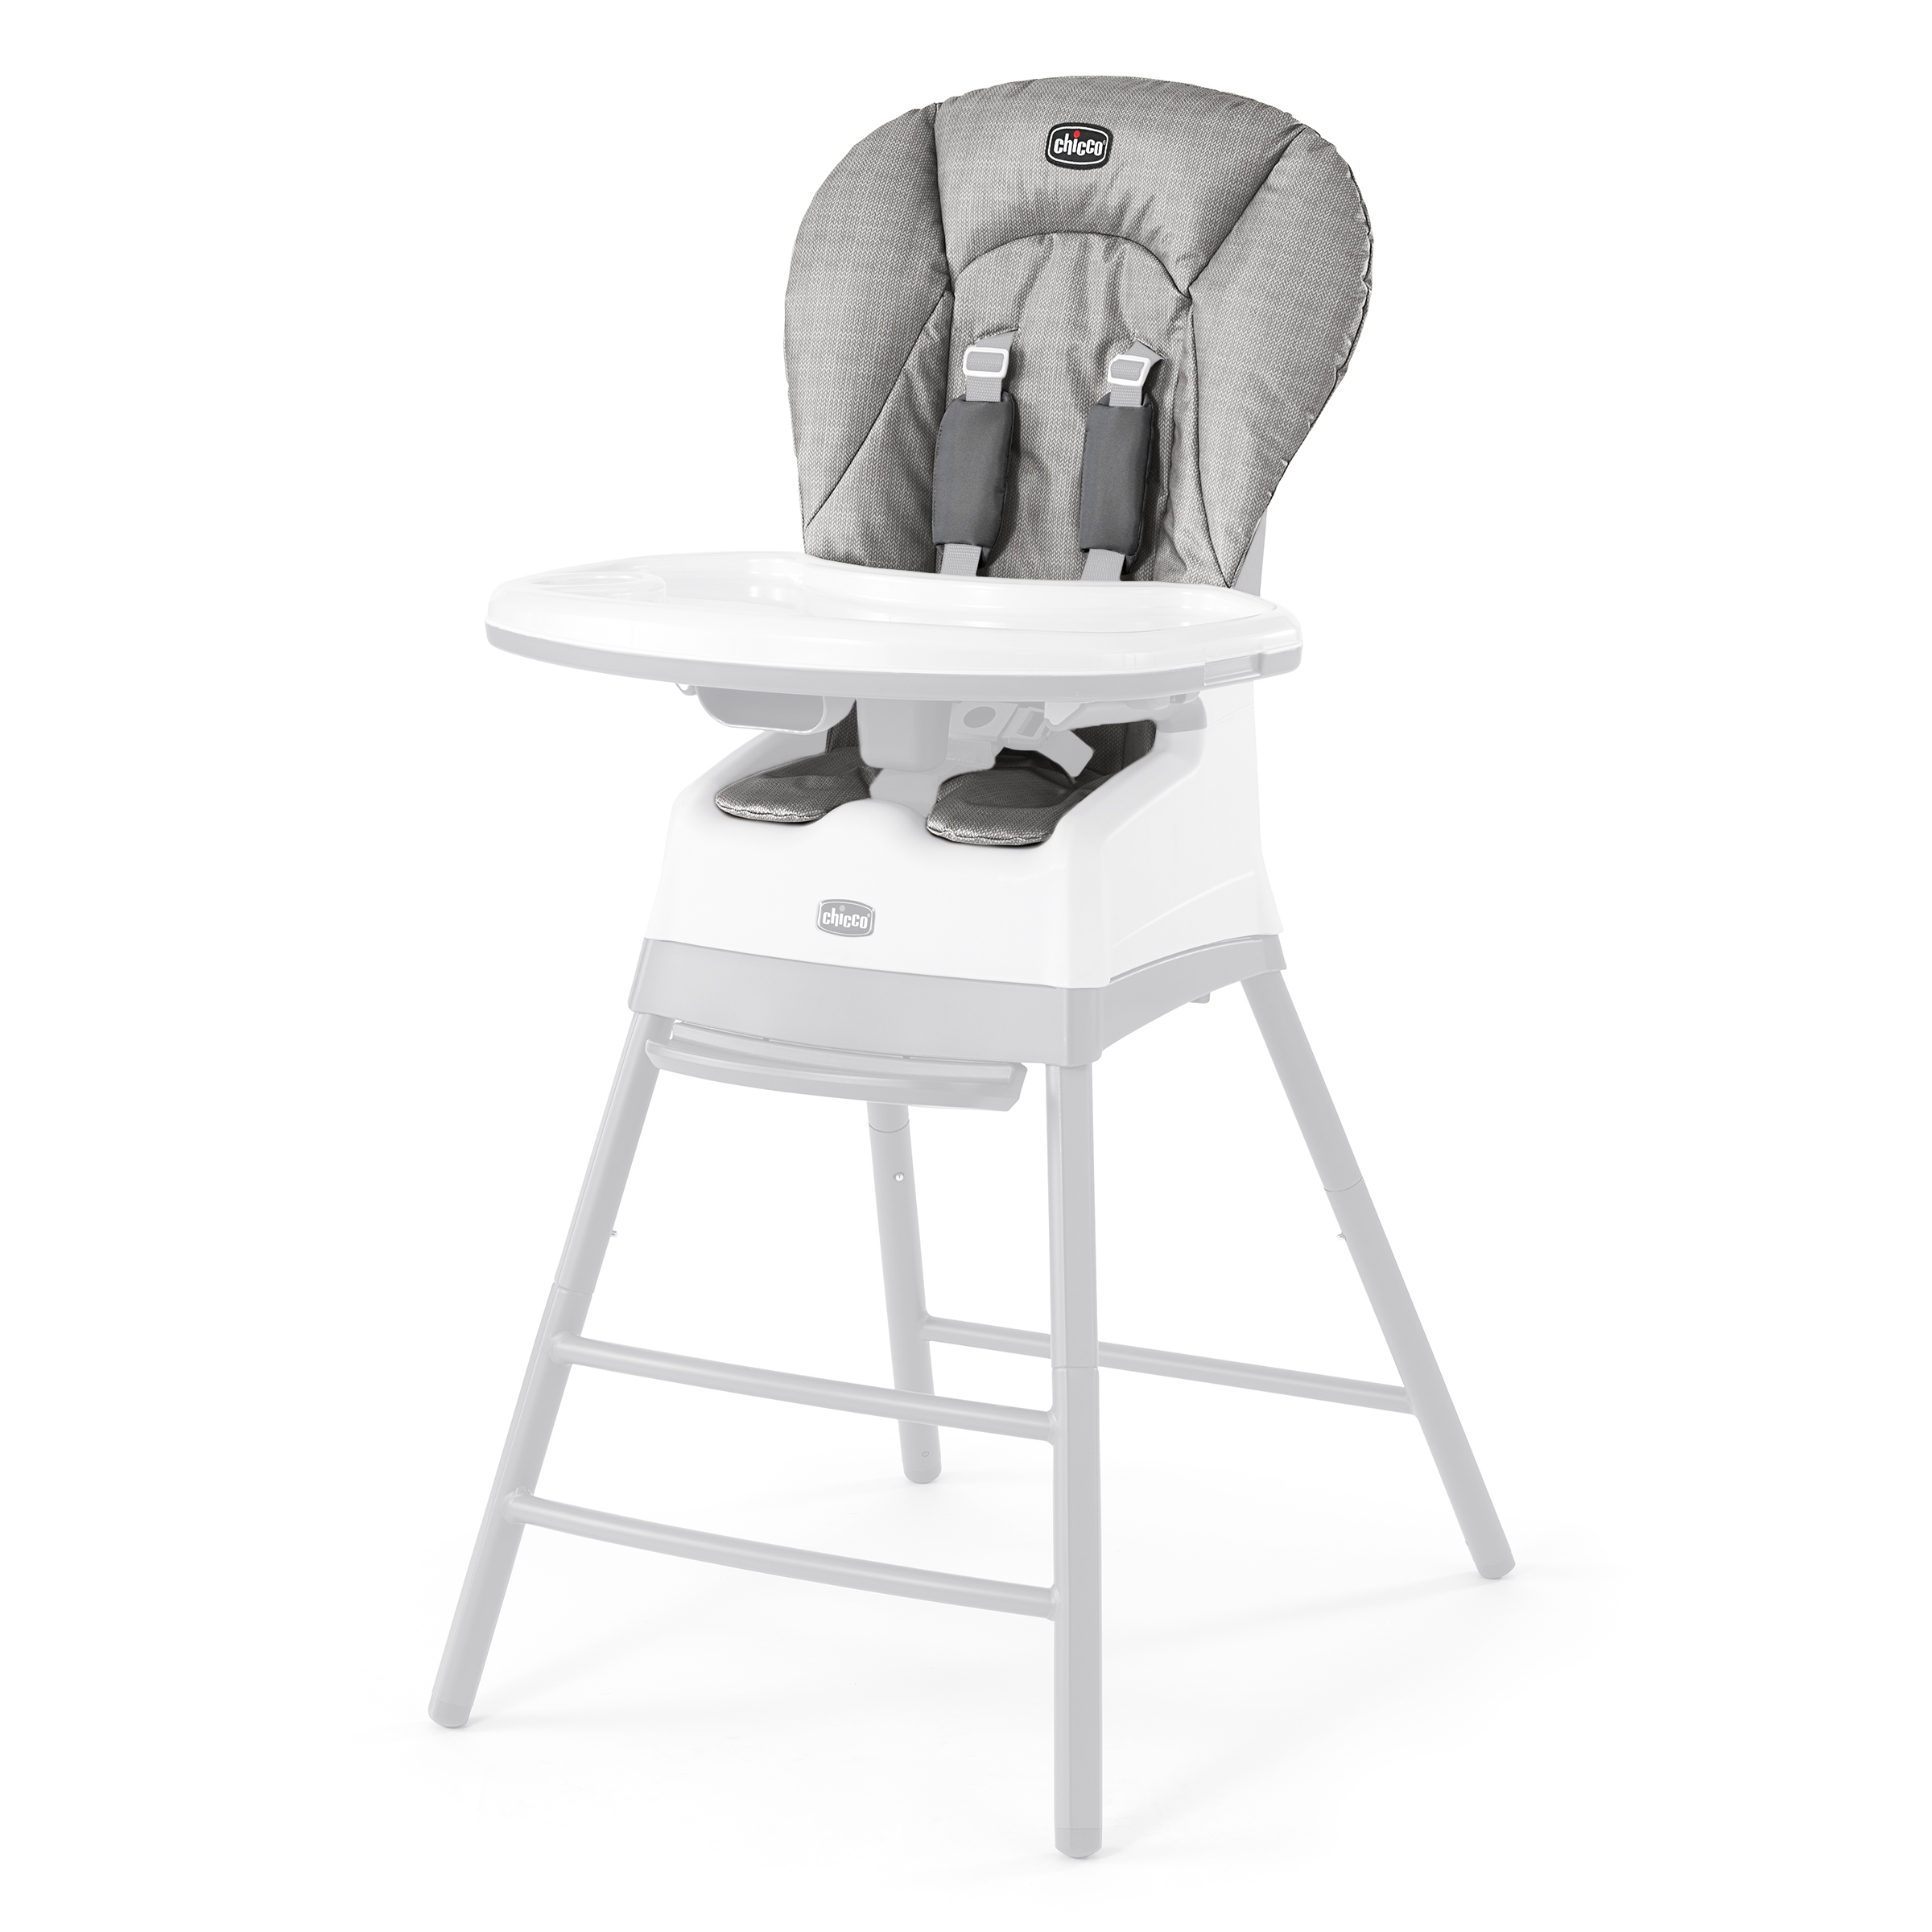 Stack High Chair or Snack Booster Seat Cover & Shoulder Pads - Weave